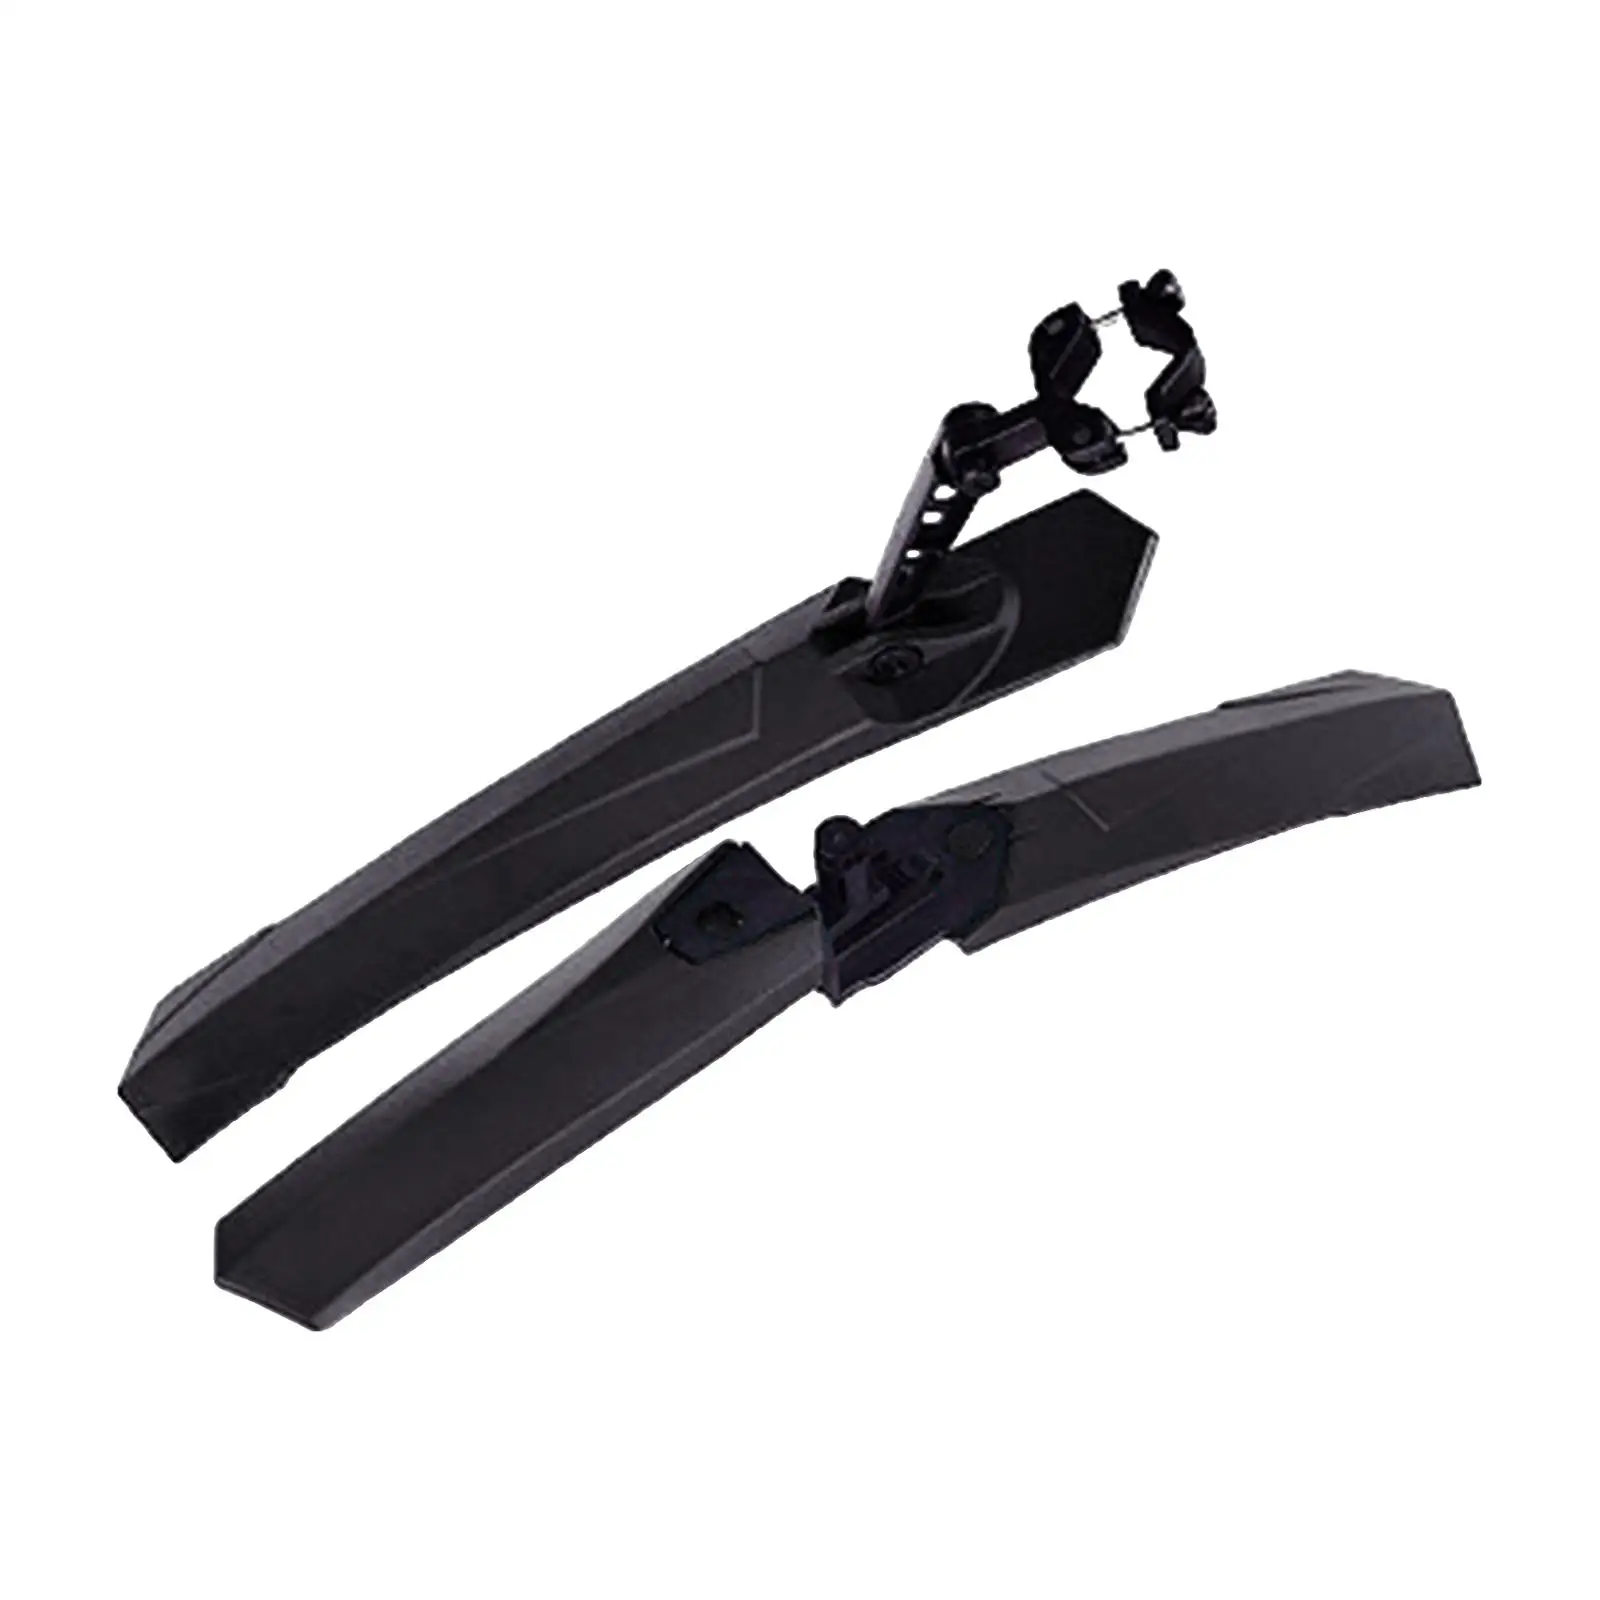 Bike Mudguard Front and Rear Set Easy to Install Bicycle Fender Bike Fender for Cycling Road Bike Travel Replacement Fittings